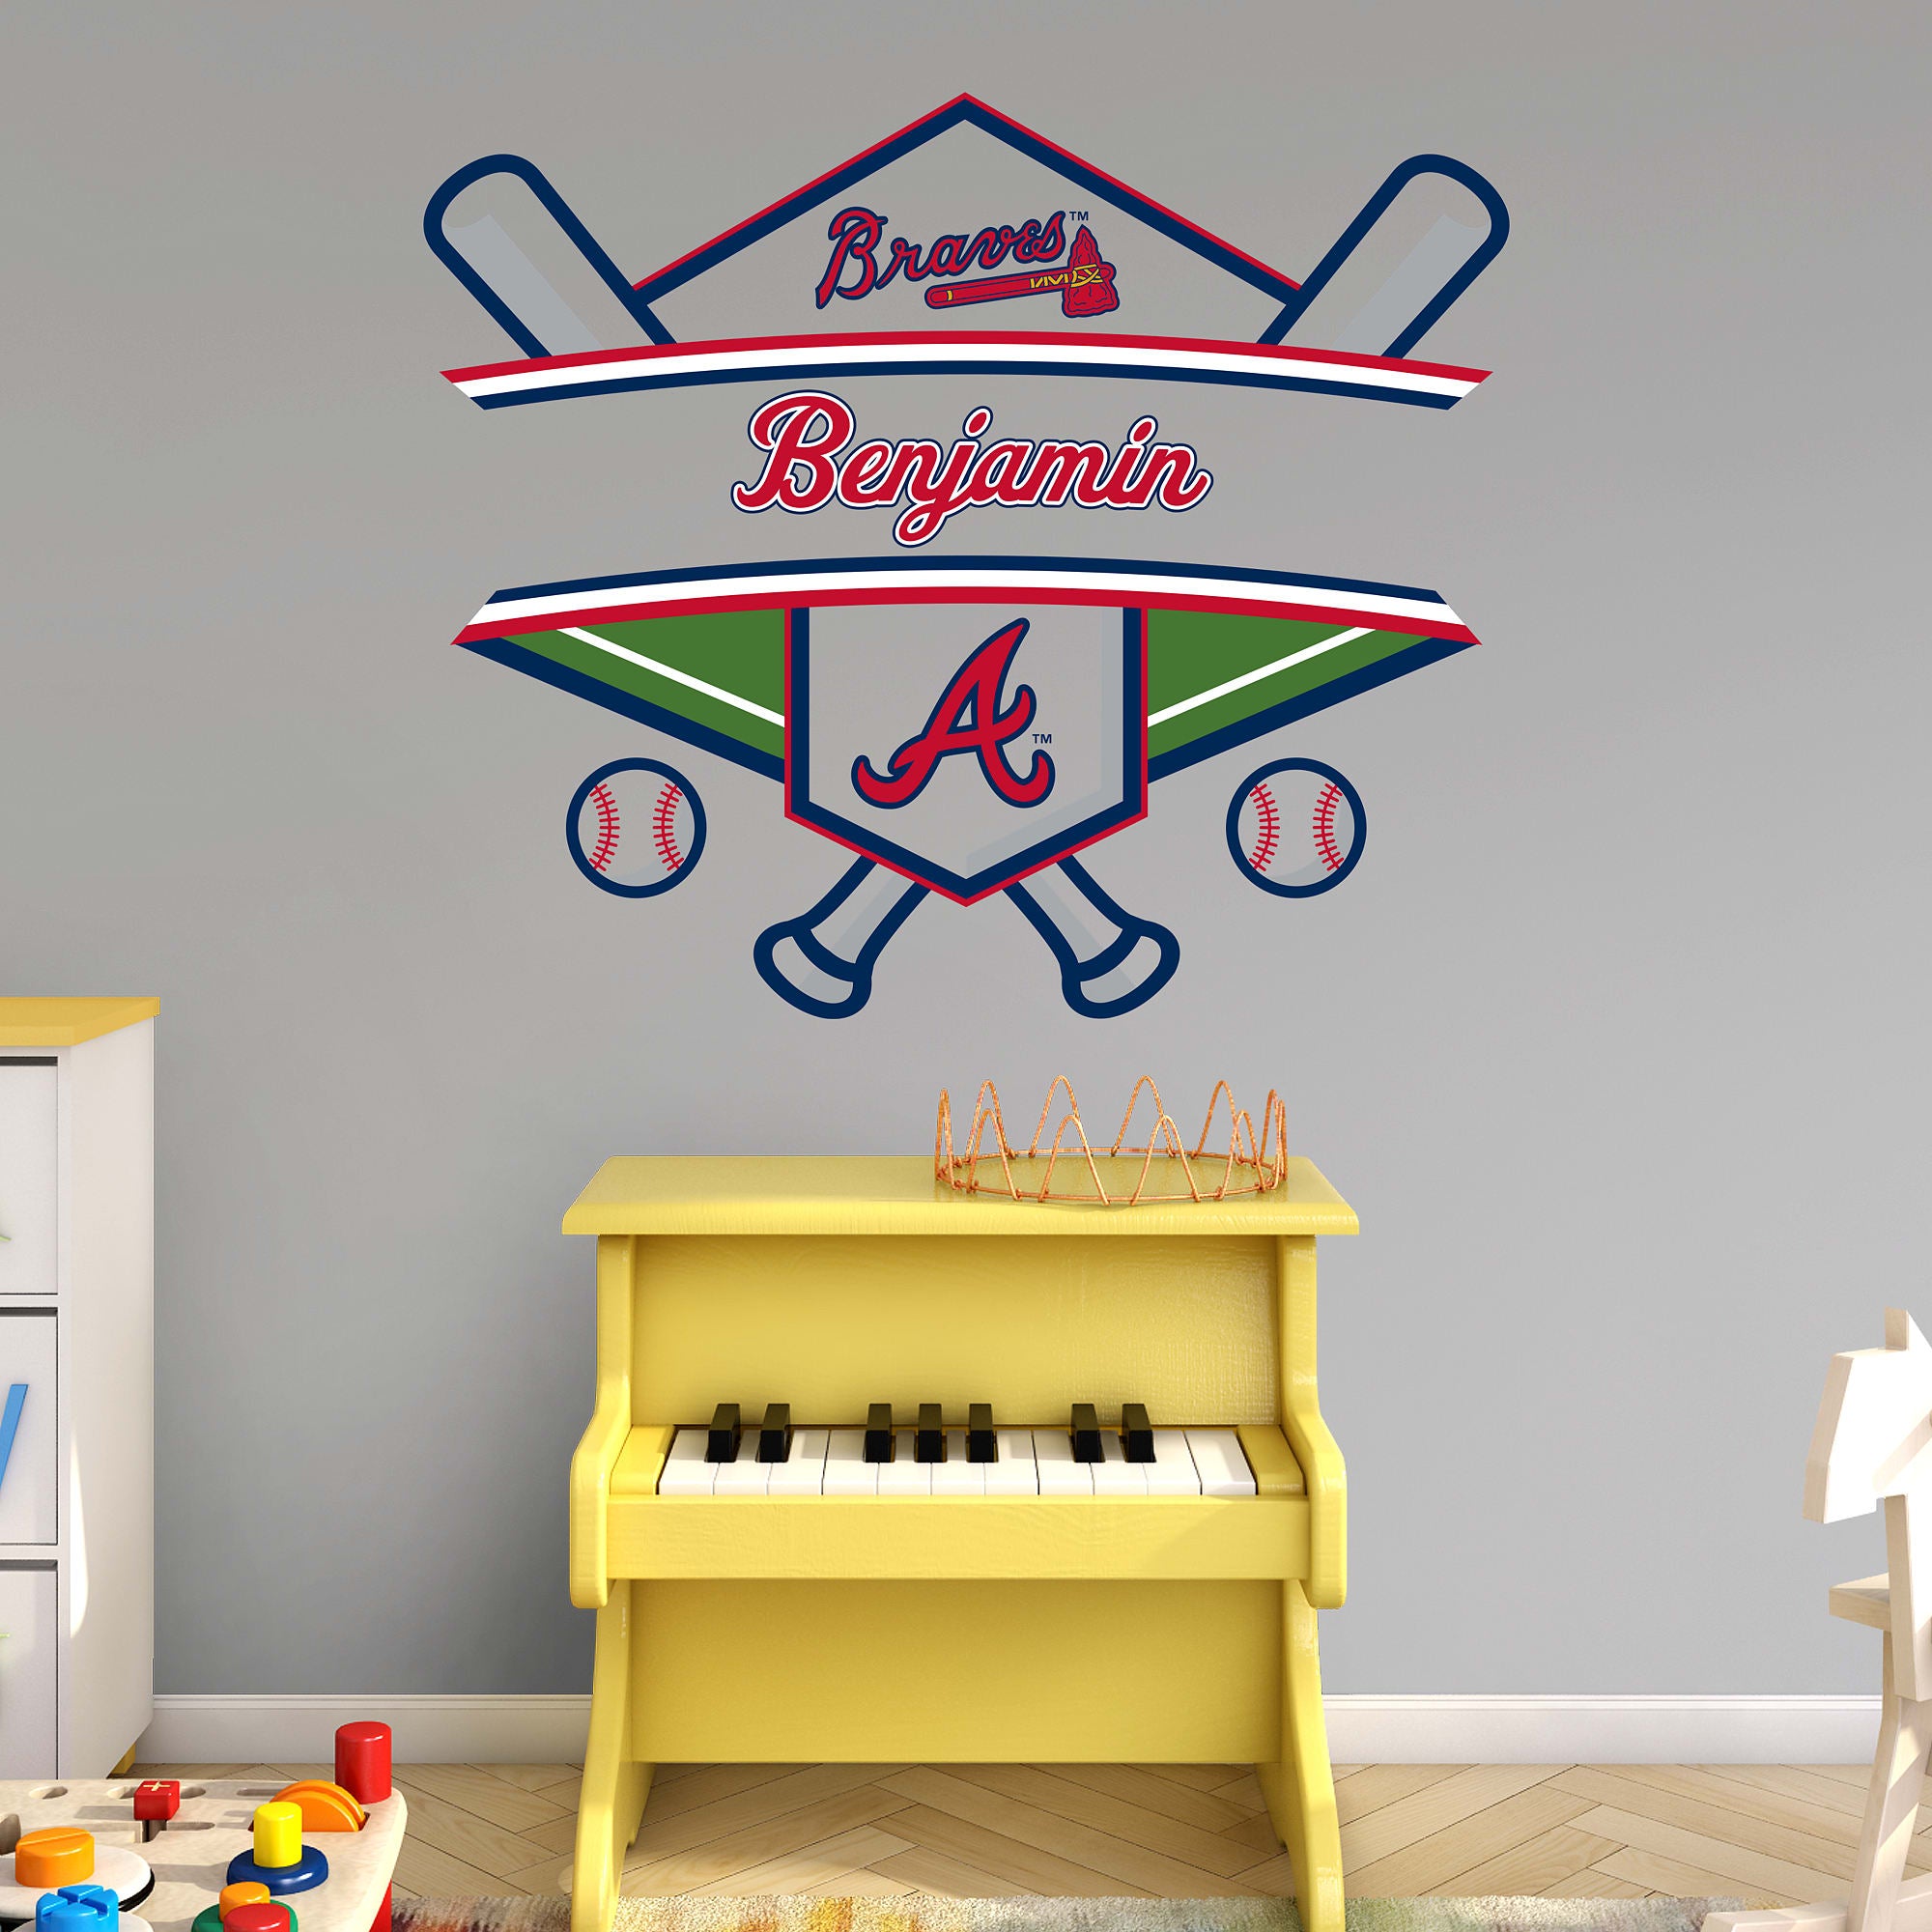 Atlanta Braves: Personalized Name - Officially Licensed MLB Transfer Decal 45.0"W x 39.0"H by Fathead | Vinyl